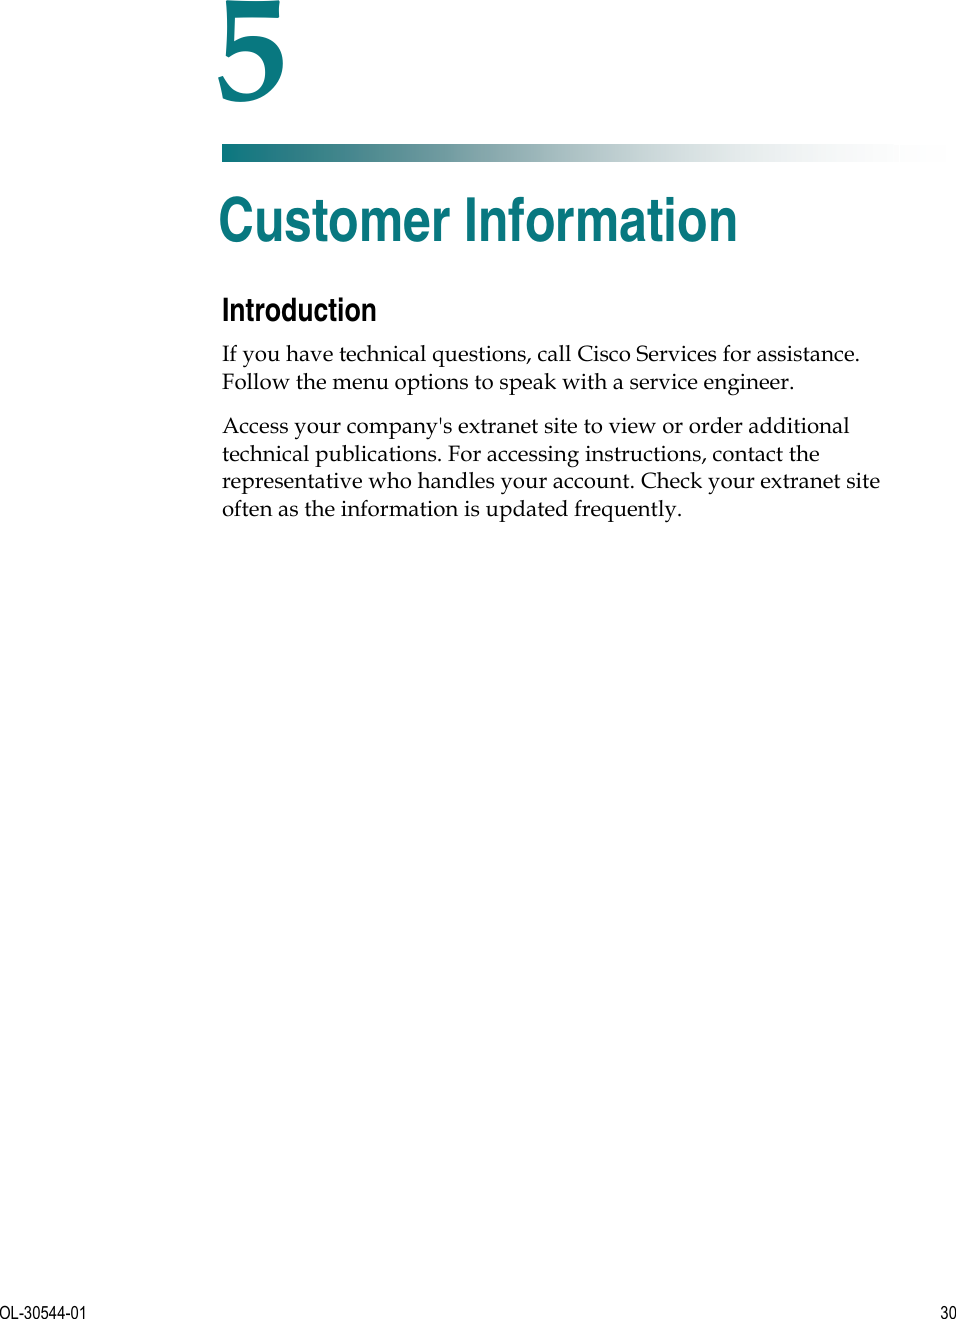   OL-30544-01  30  Introduction If you have technical questions, call Cisco Services for assistance. Follow the menu options to speak with a service engineer. Access your company&apos;s extranet site to view or order additional technical publications. For accessing instructions, contact the representative who handles your account. Check your extranet site often as the information is updated frequently.   5 Chapter 5 Customer Information 